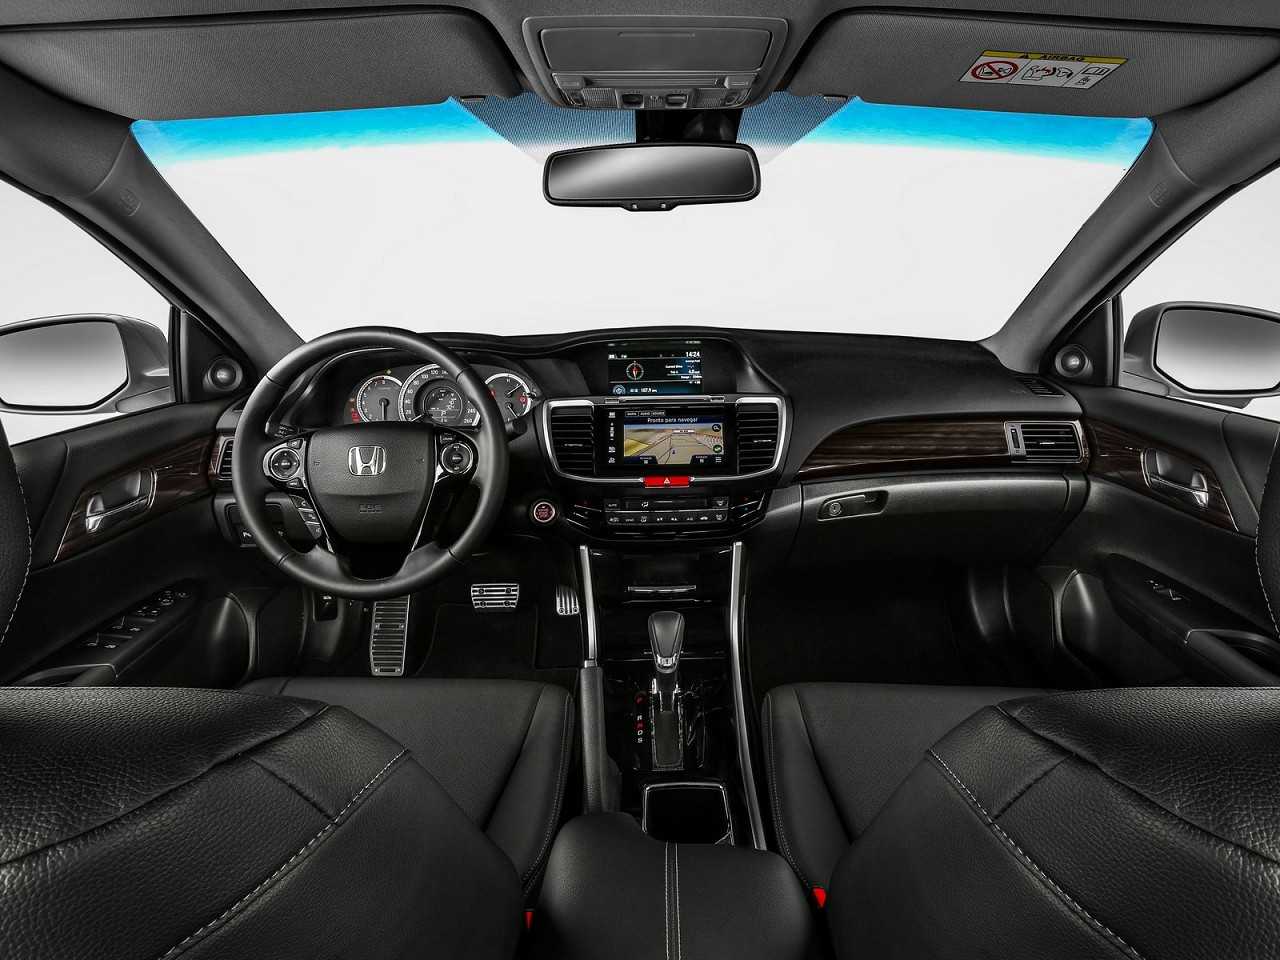 HondaAccord 2016 - painel